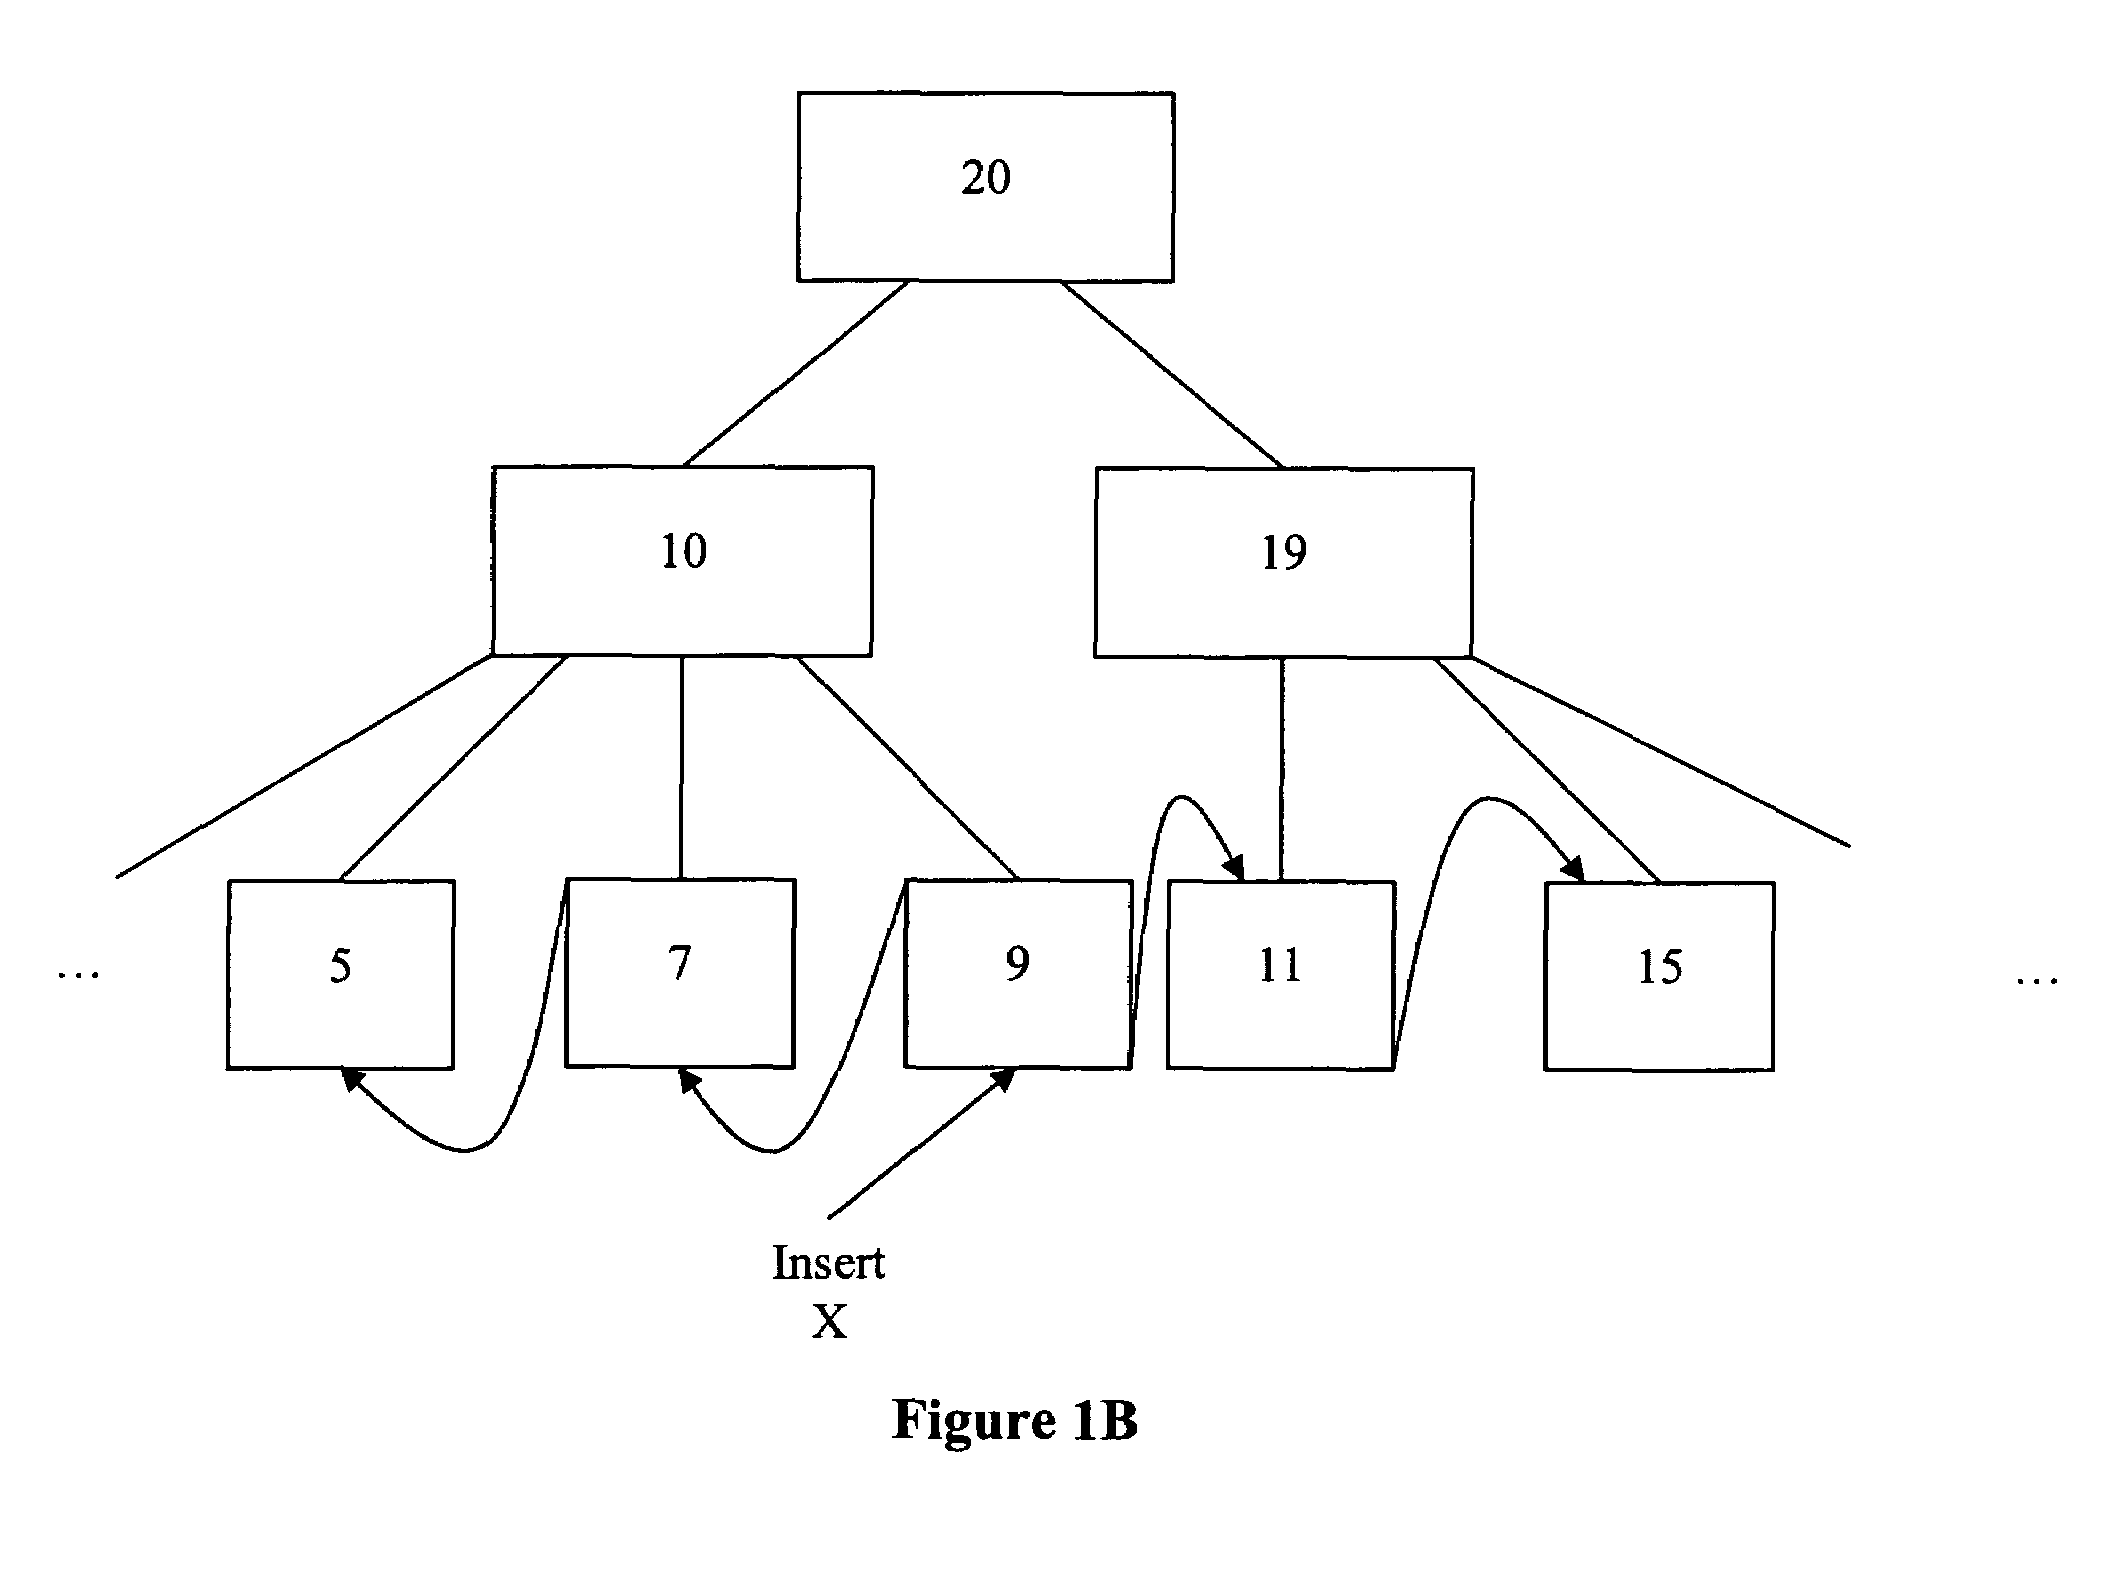 Method and system for rapid insertion of various data streams into sorted tree structures